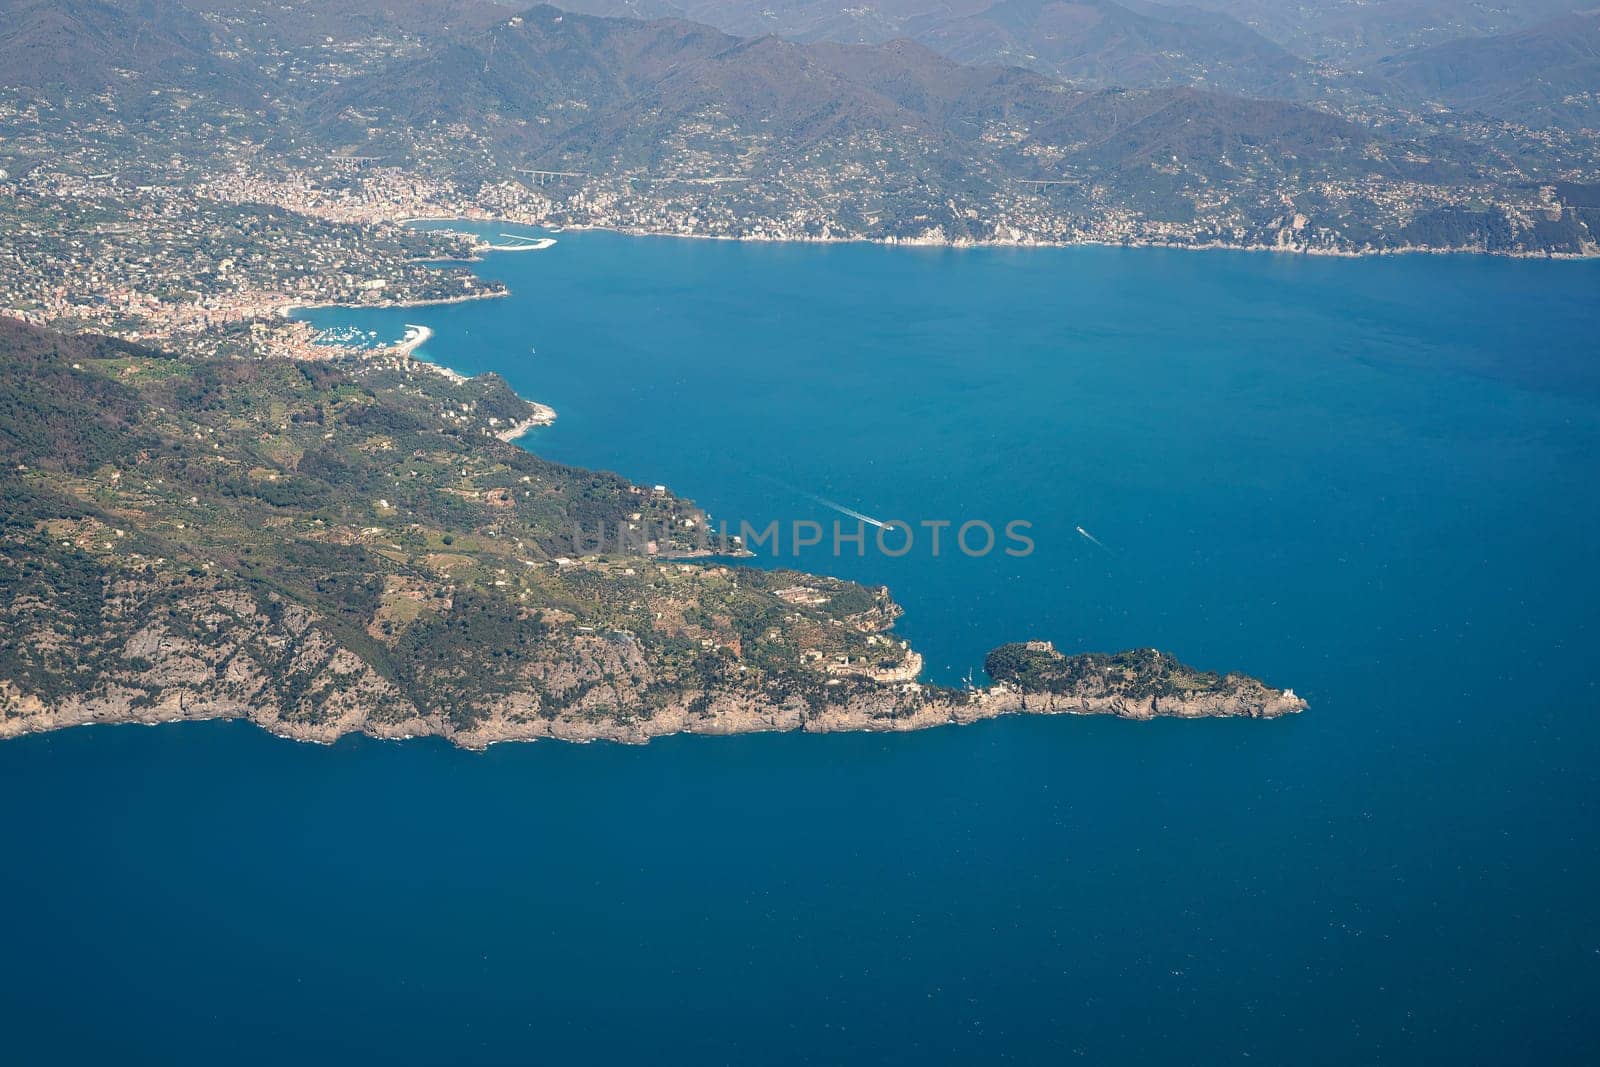 The Natural Park of Portofino, Liguria, Italy. aerial view from airplane before landing in Genoa